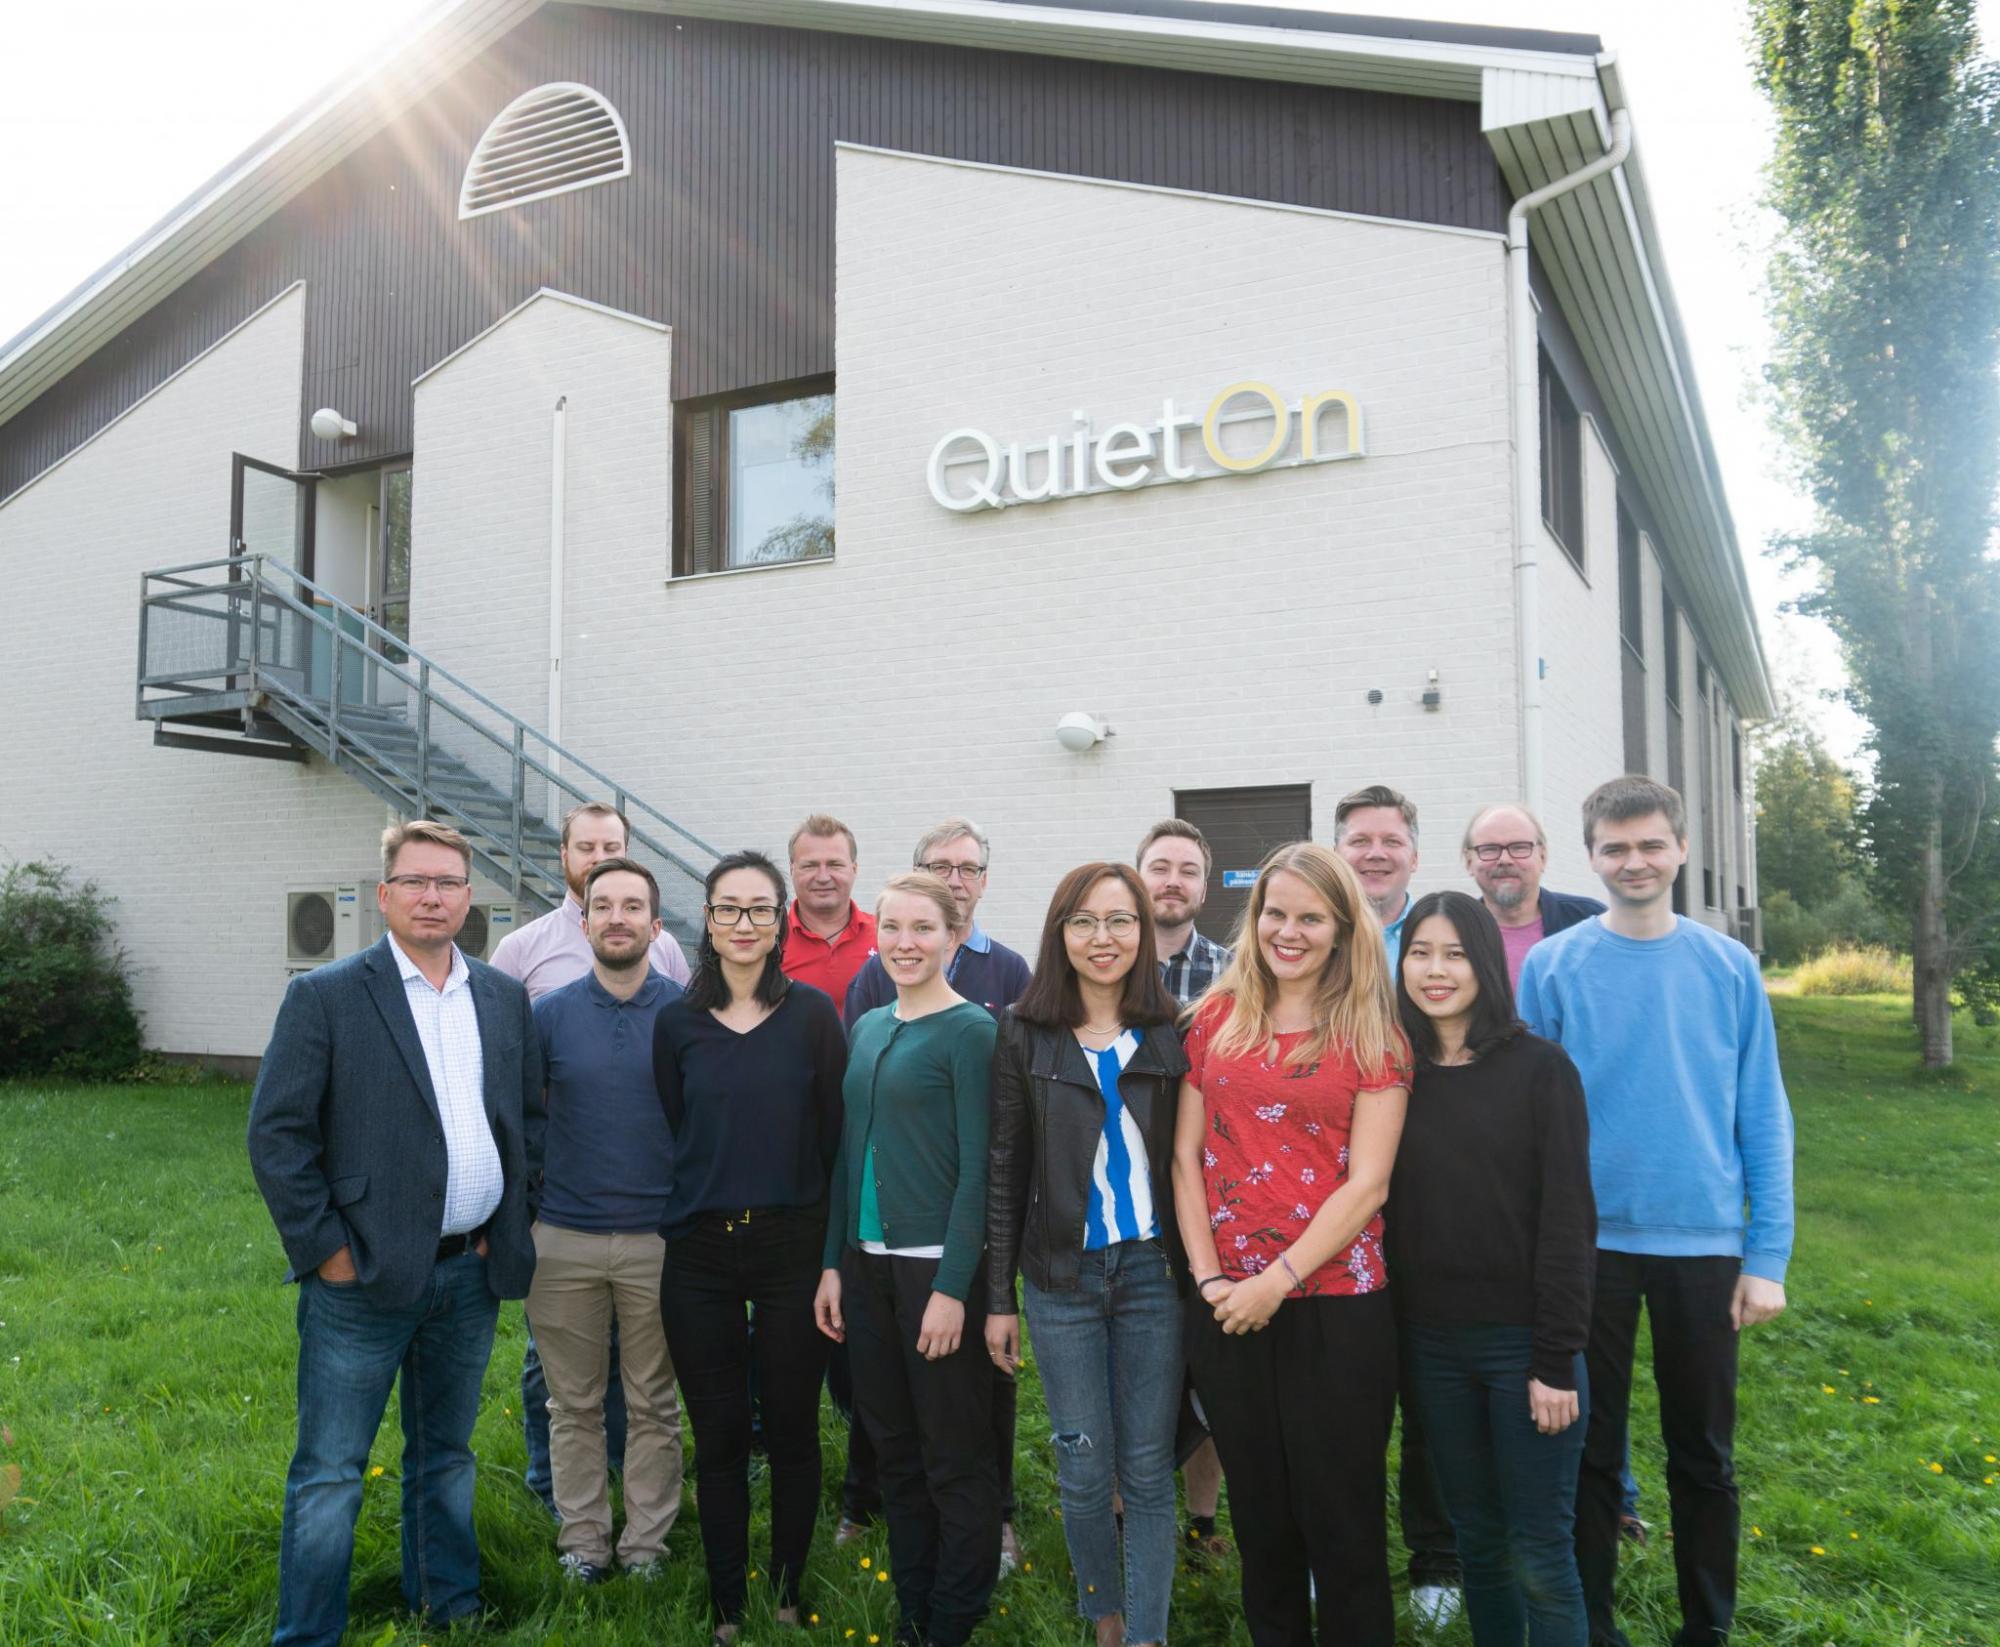 Janne Kyllönen is Chief Product Officer and Chairman of Board at QuietOn Ltd.